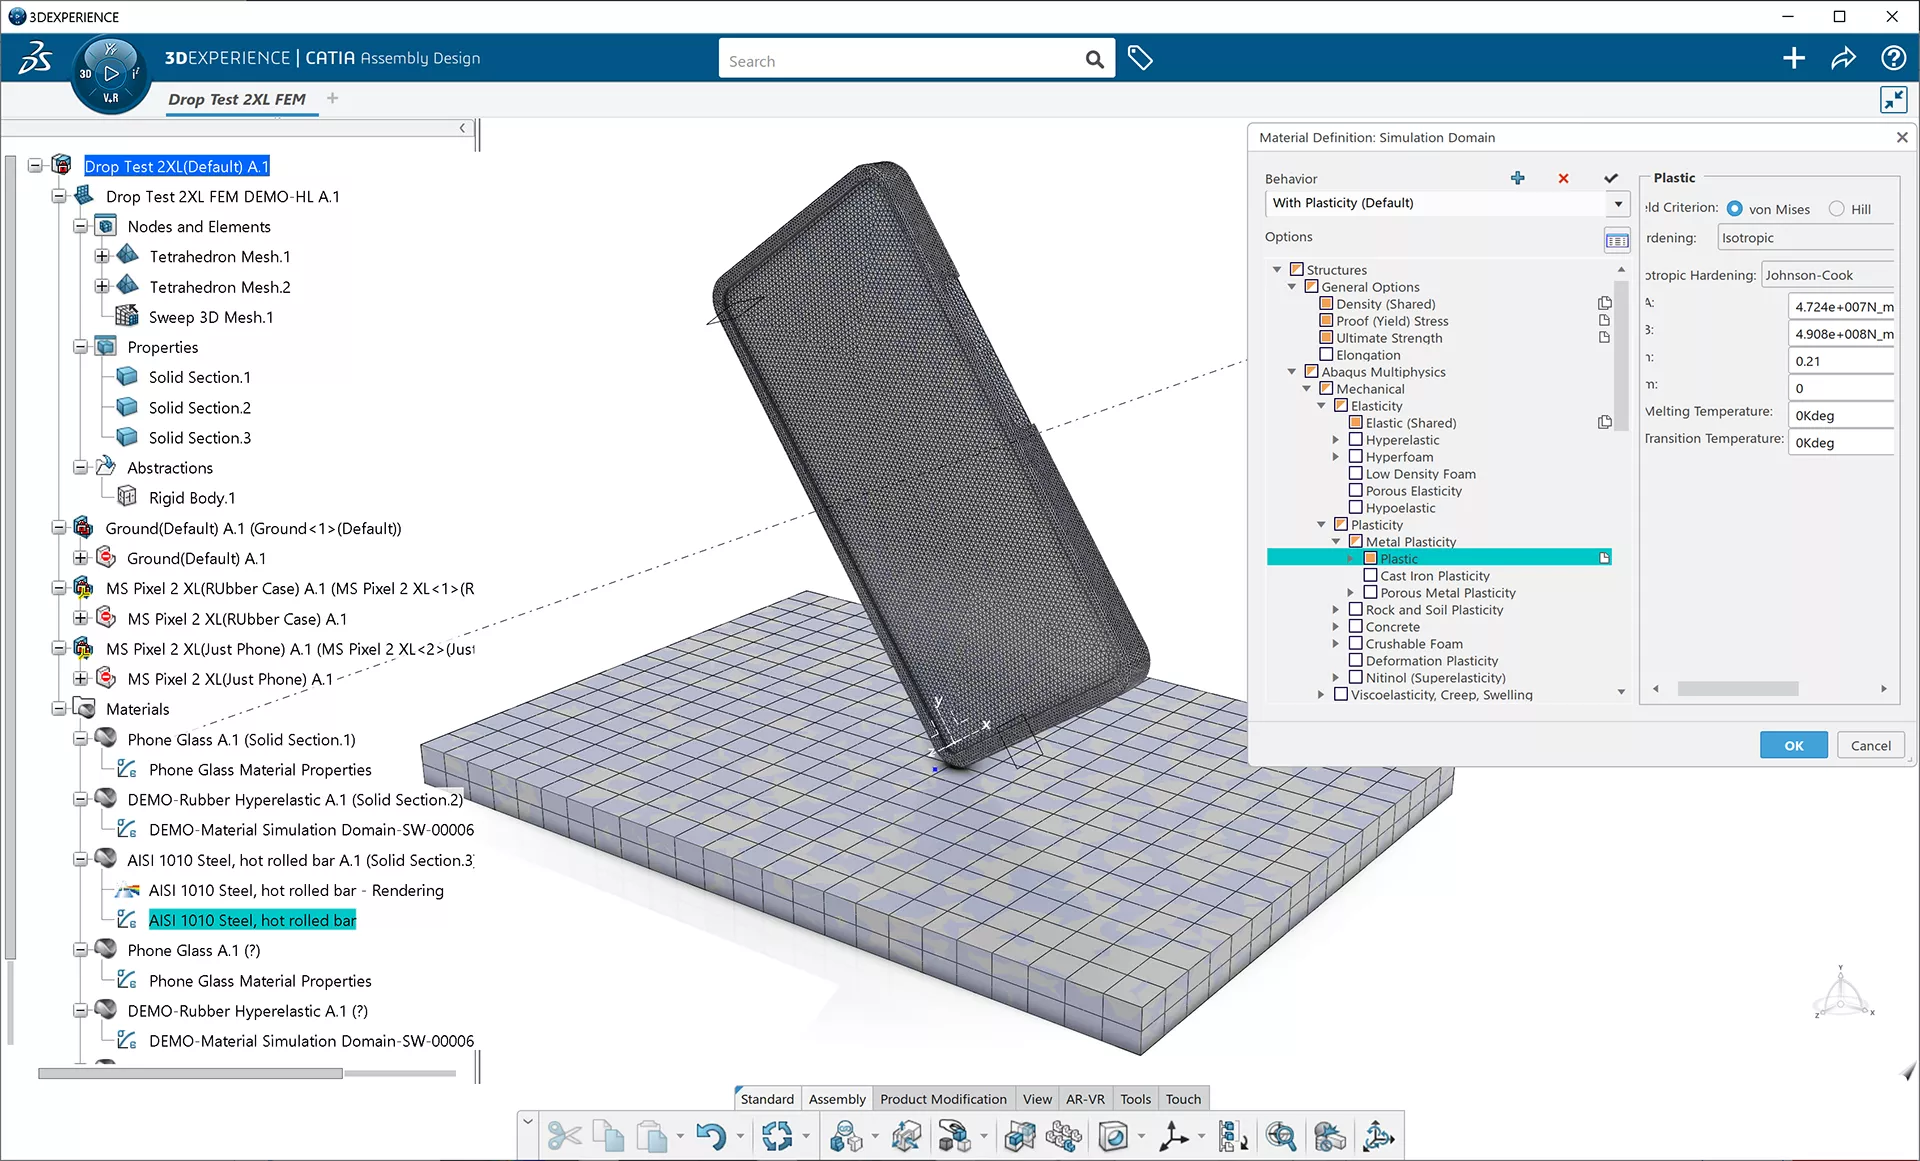 Abaqus material assignment in 3DEXPERIENCE STRUCTURAL